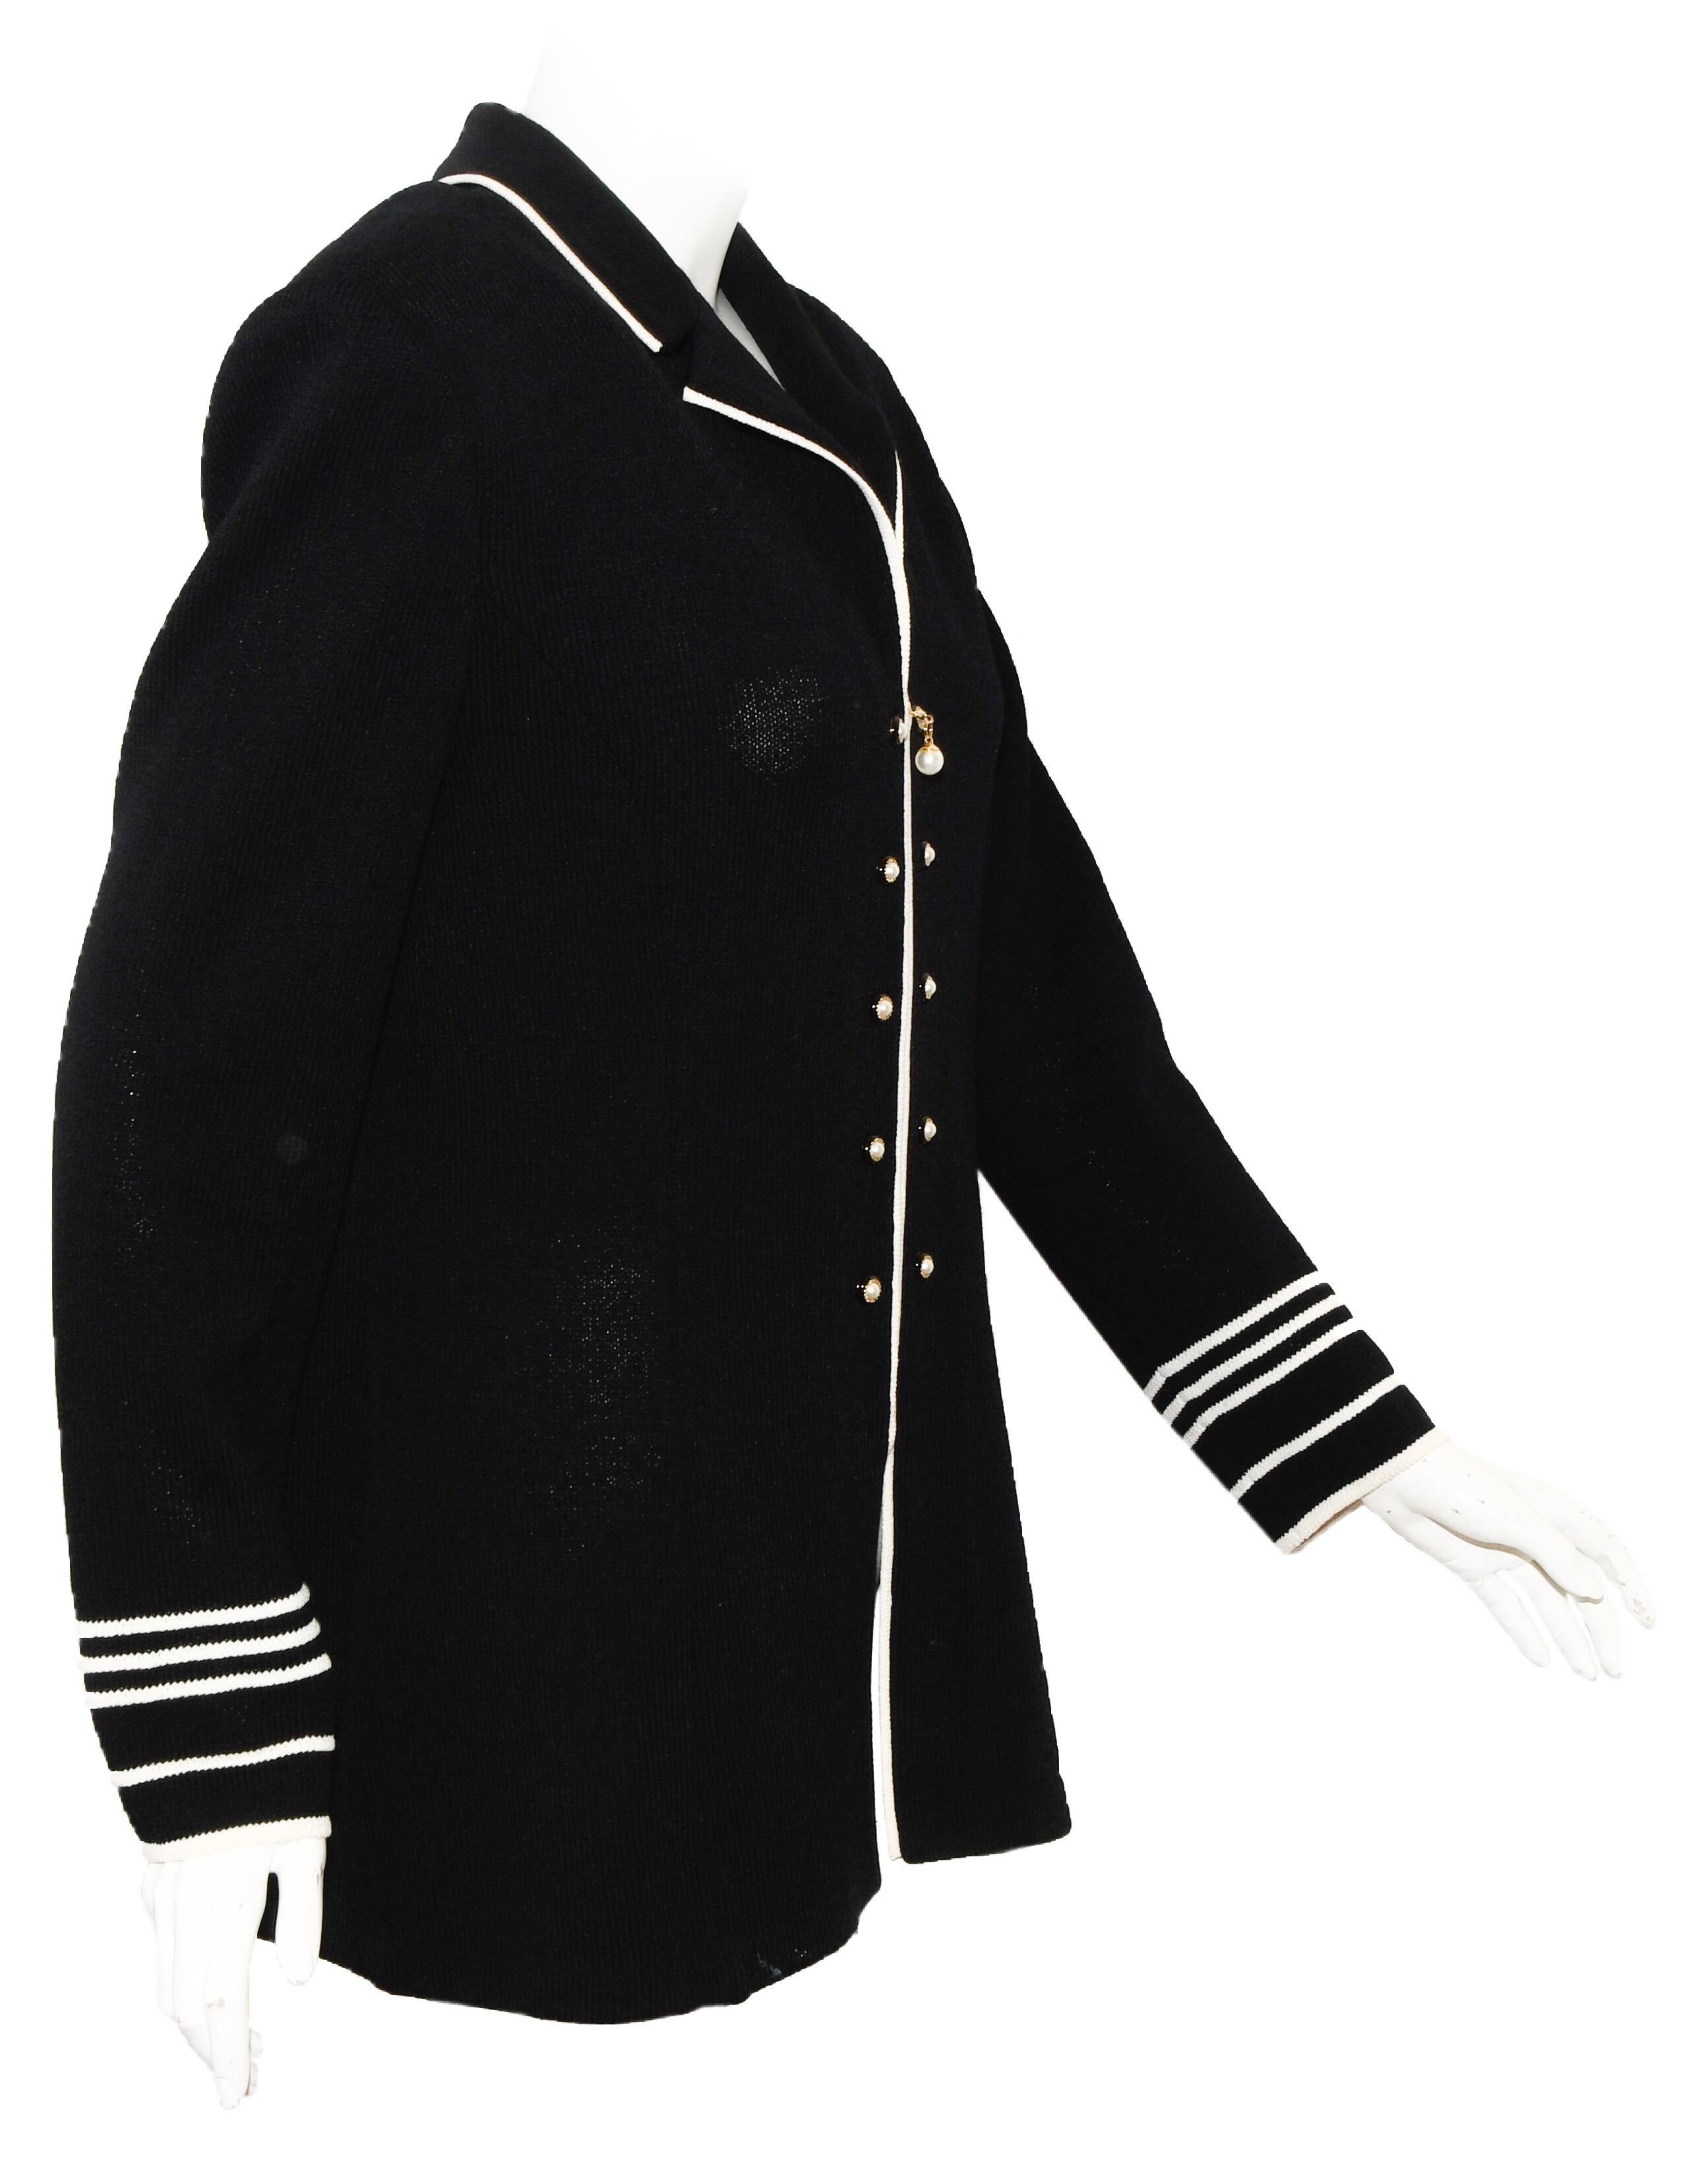 St. John black knit jacket includes faux pearl buttons on both sides of the zipper at front.   This jacket flaunts contrasting white piping that frames its refined knit texture. Tailored and finished, this is a wardrobe essential with a rich